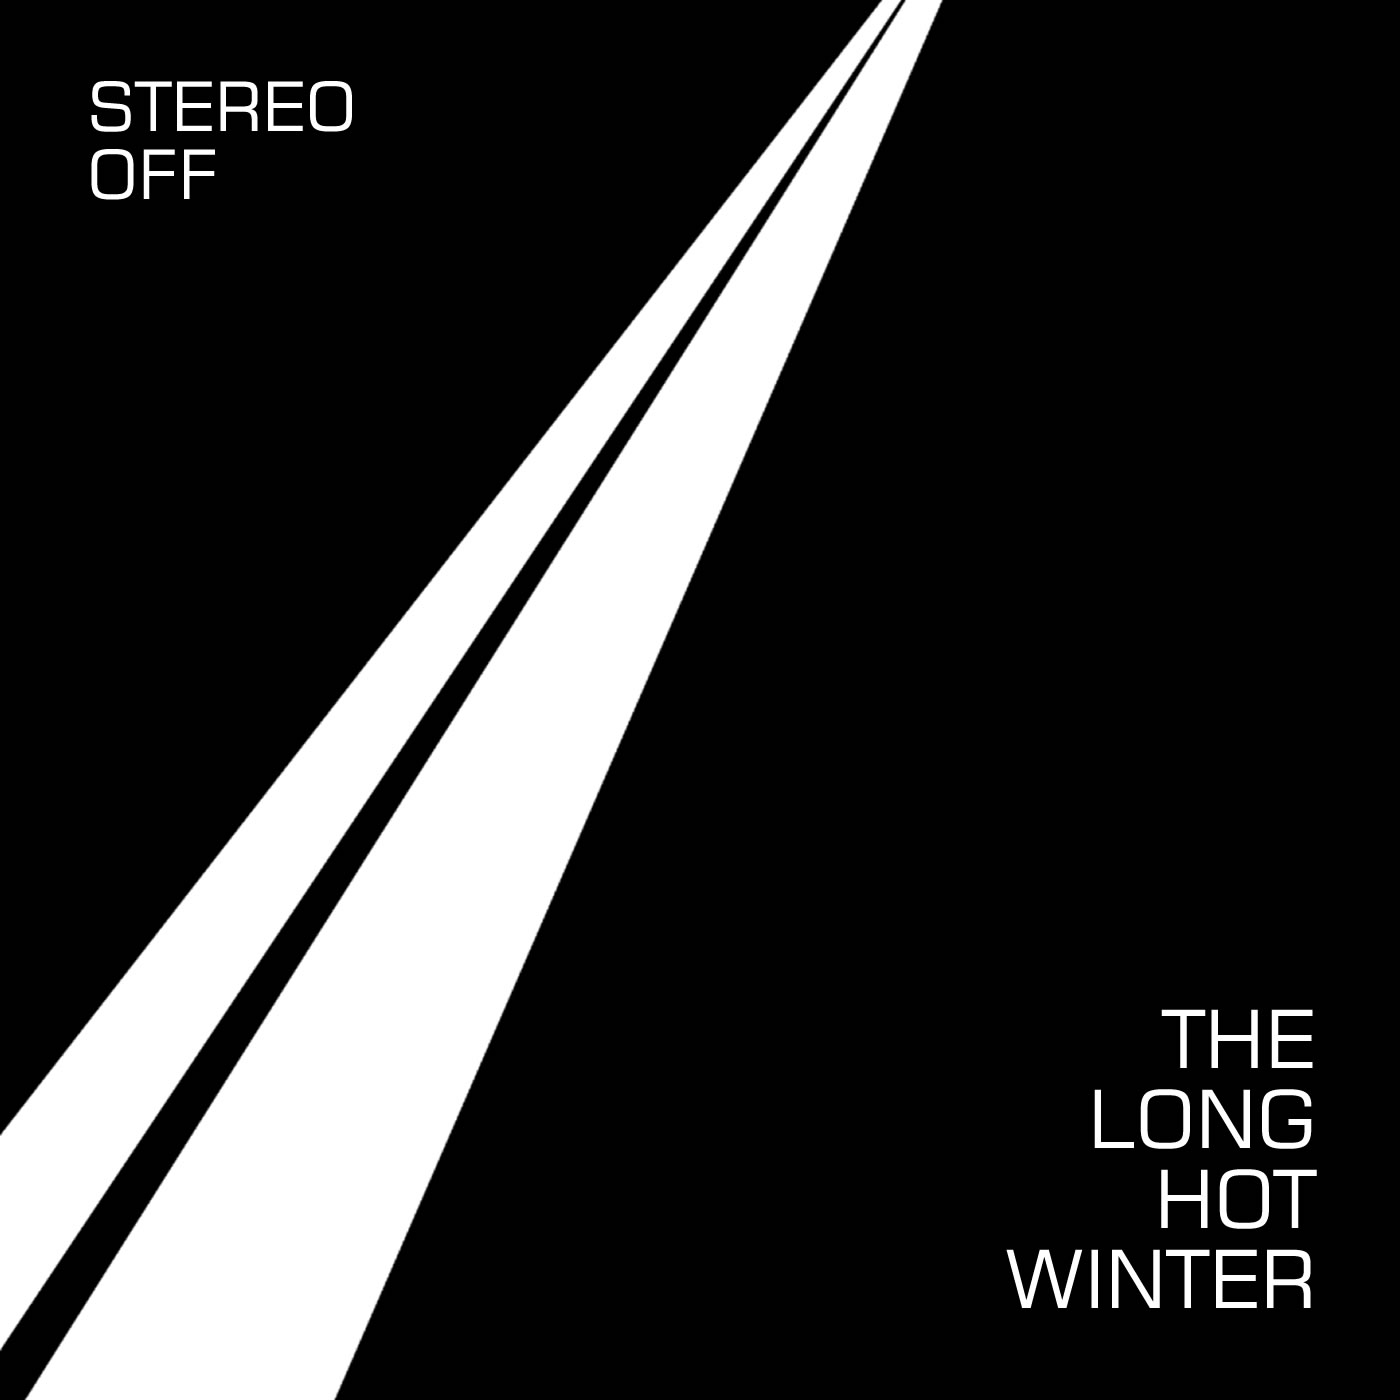 Stereo-off-the-long-hot-winter-EP2